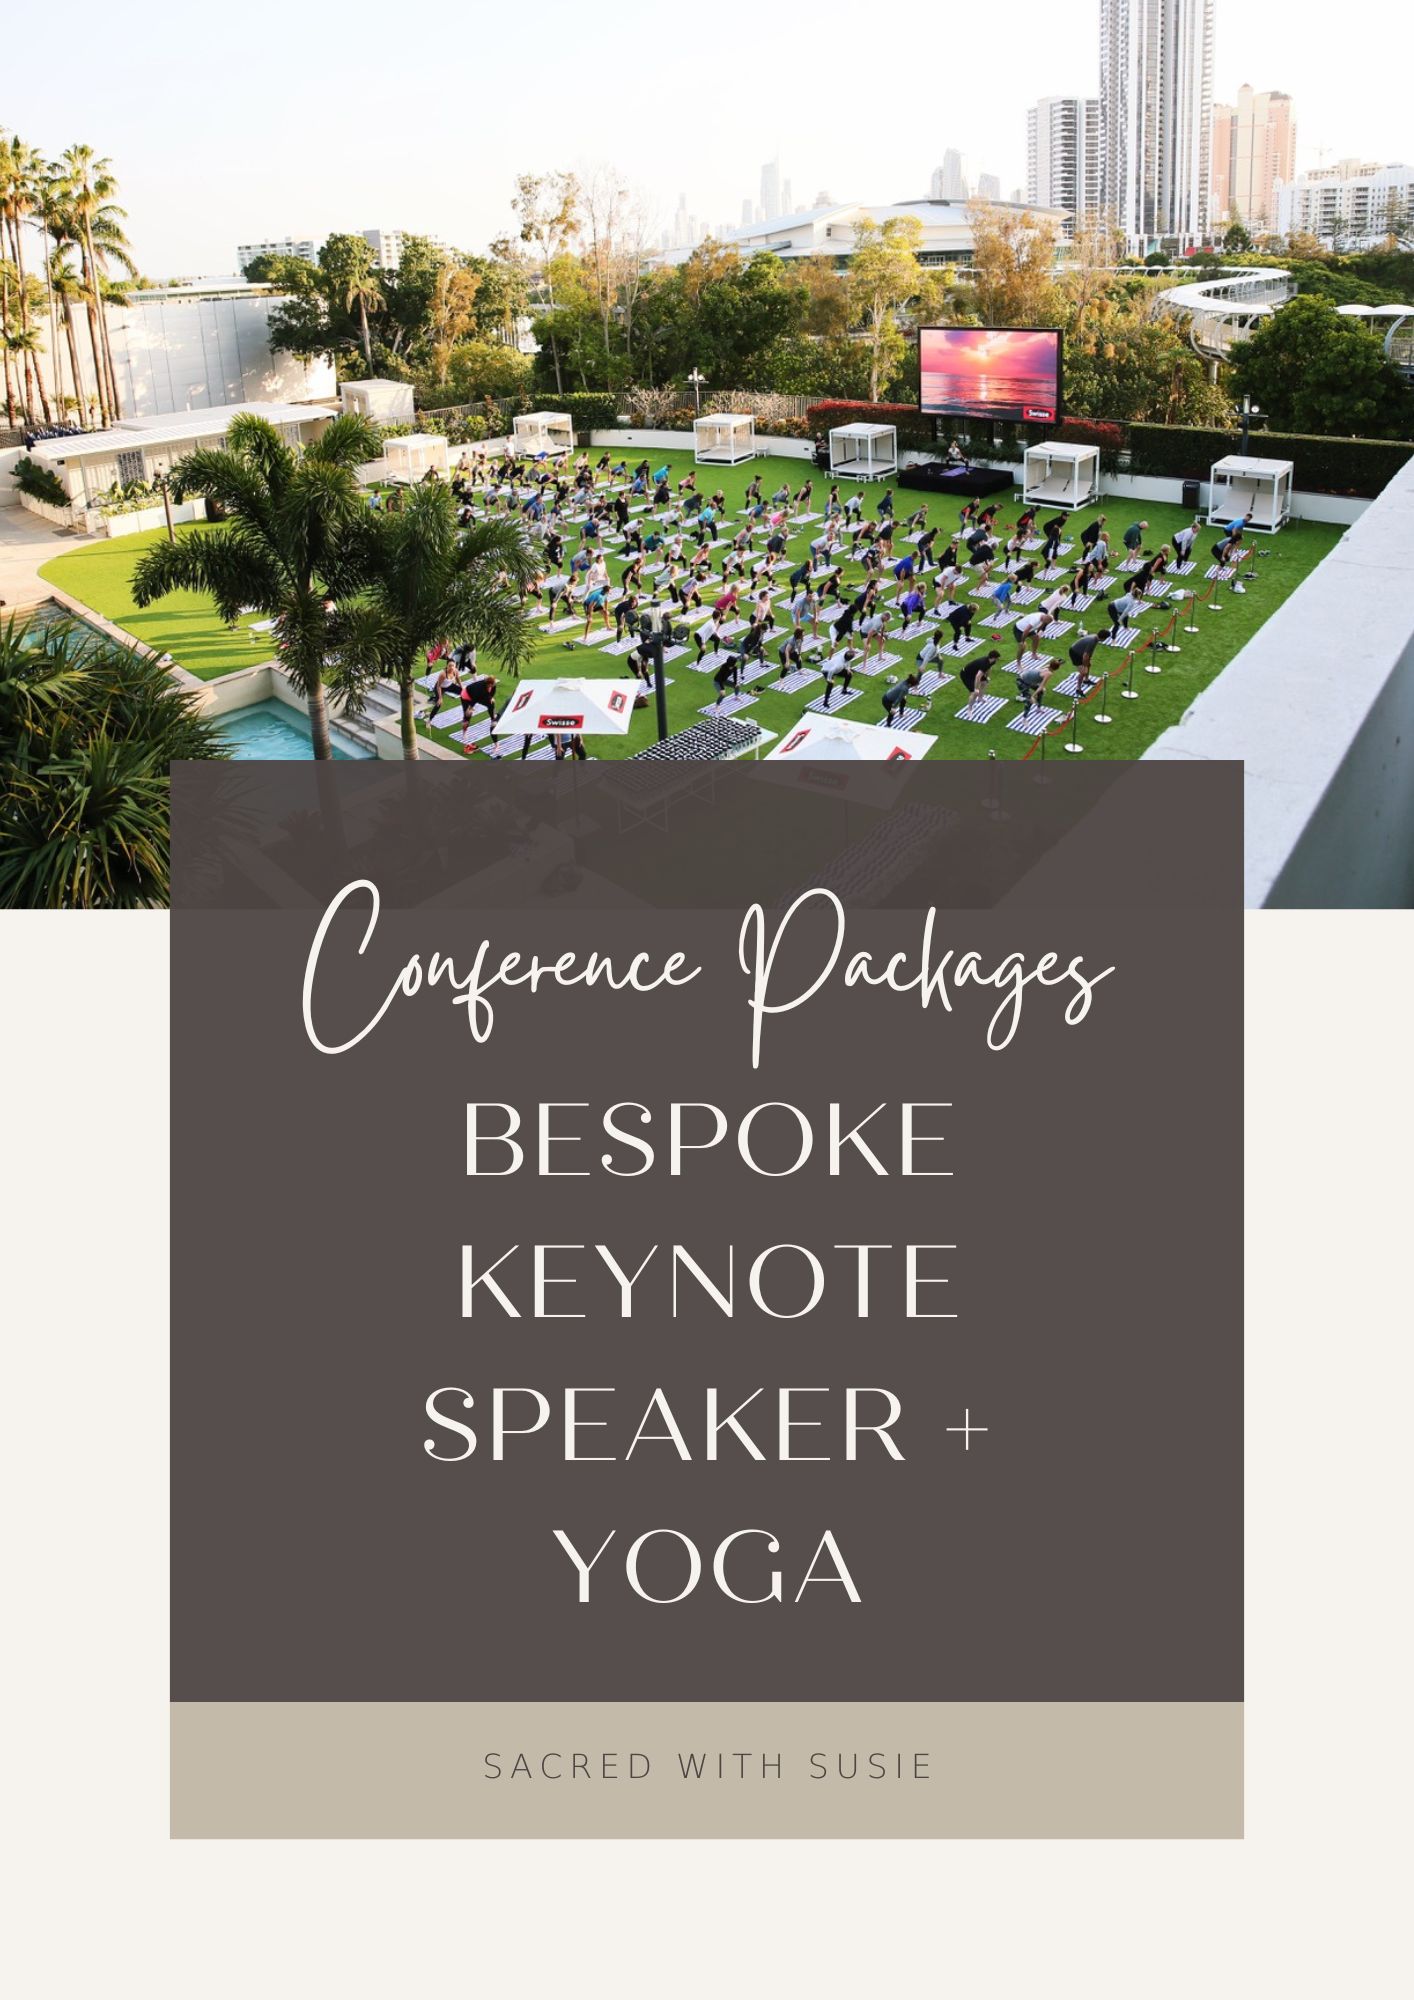 Sacred with Susie Conference Packages cover image